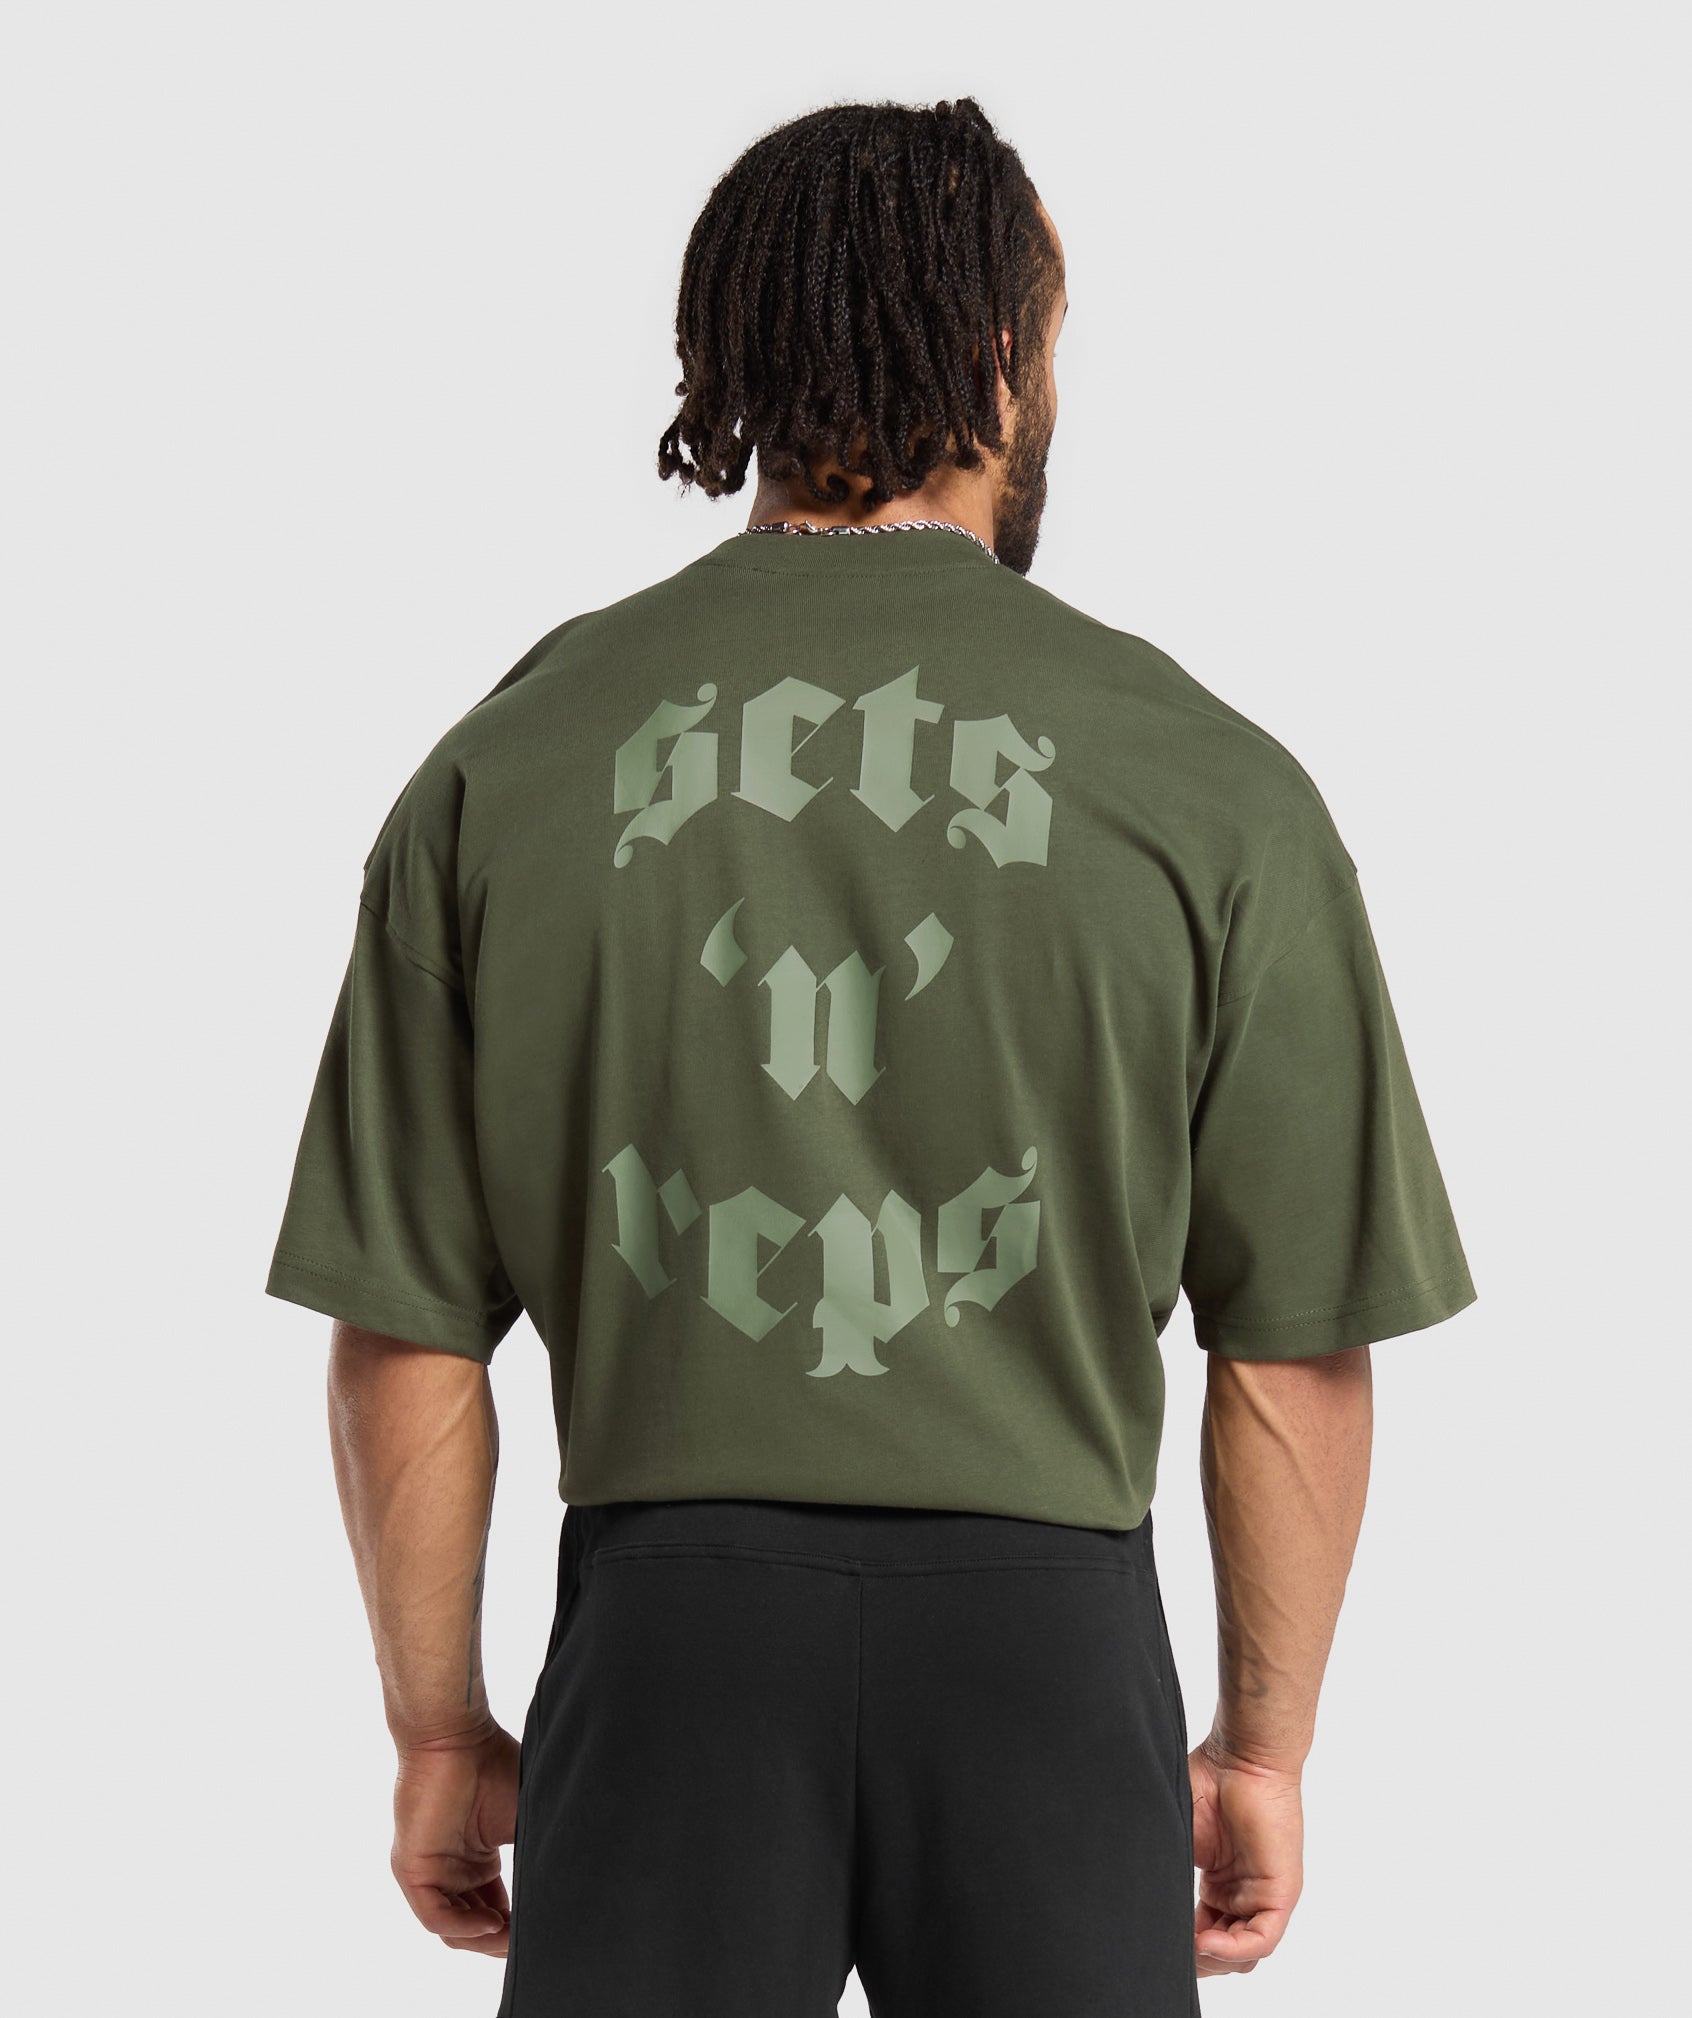 Sets N Reps T-Shirt in Winter Olive - view 1